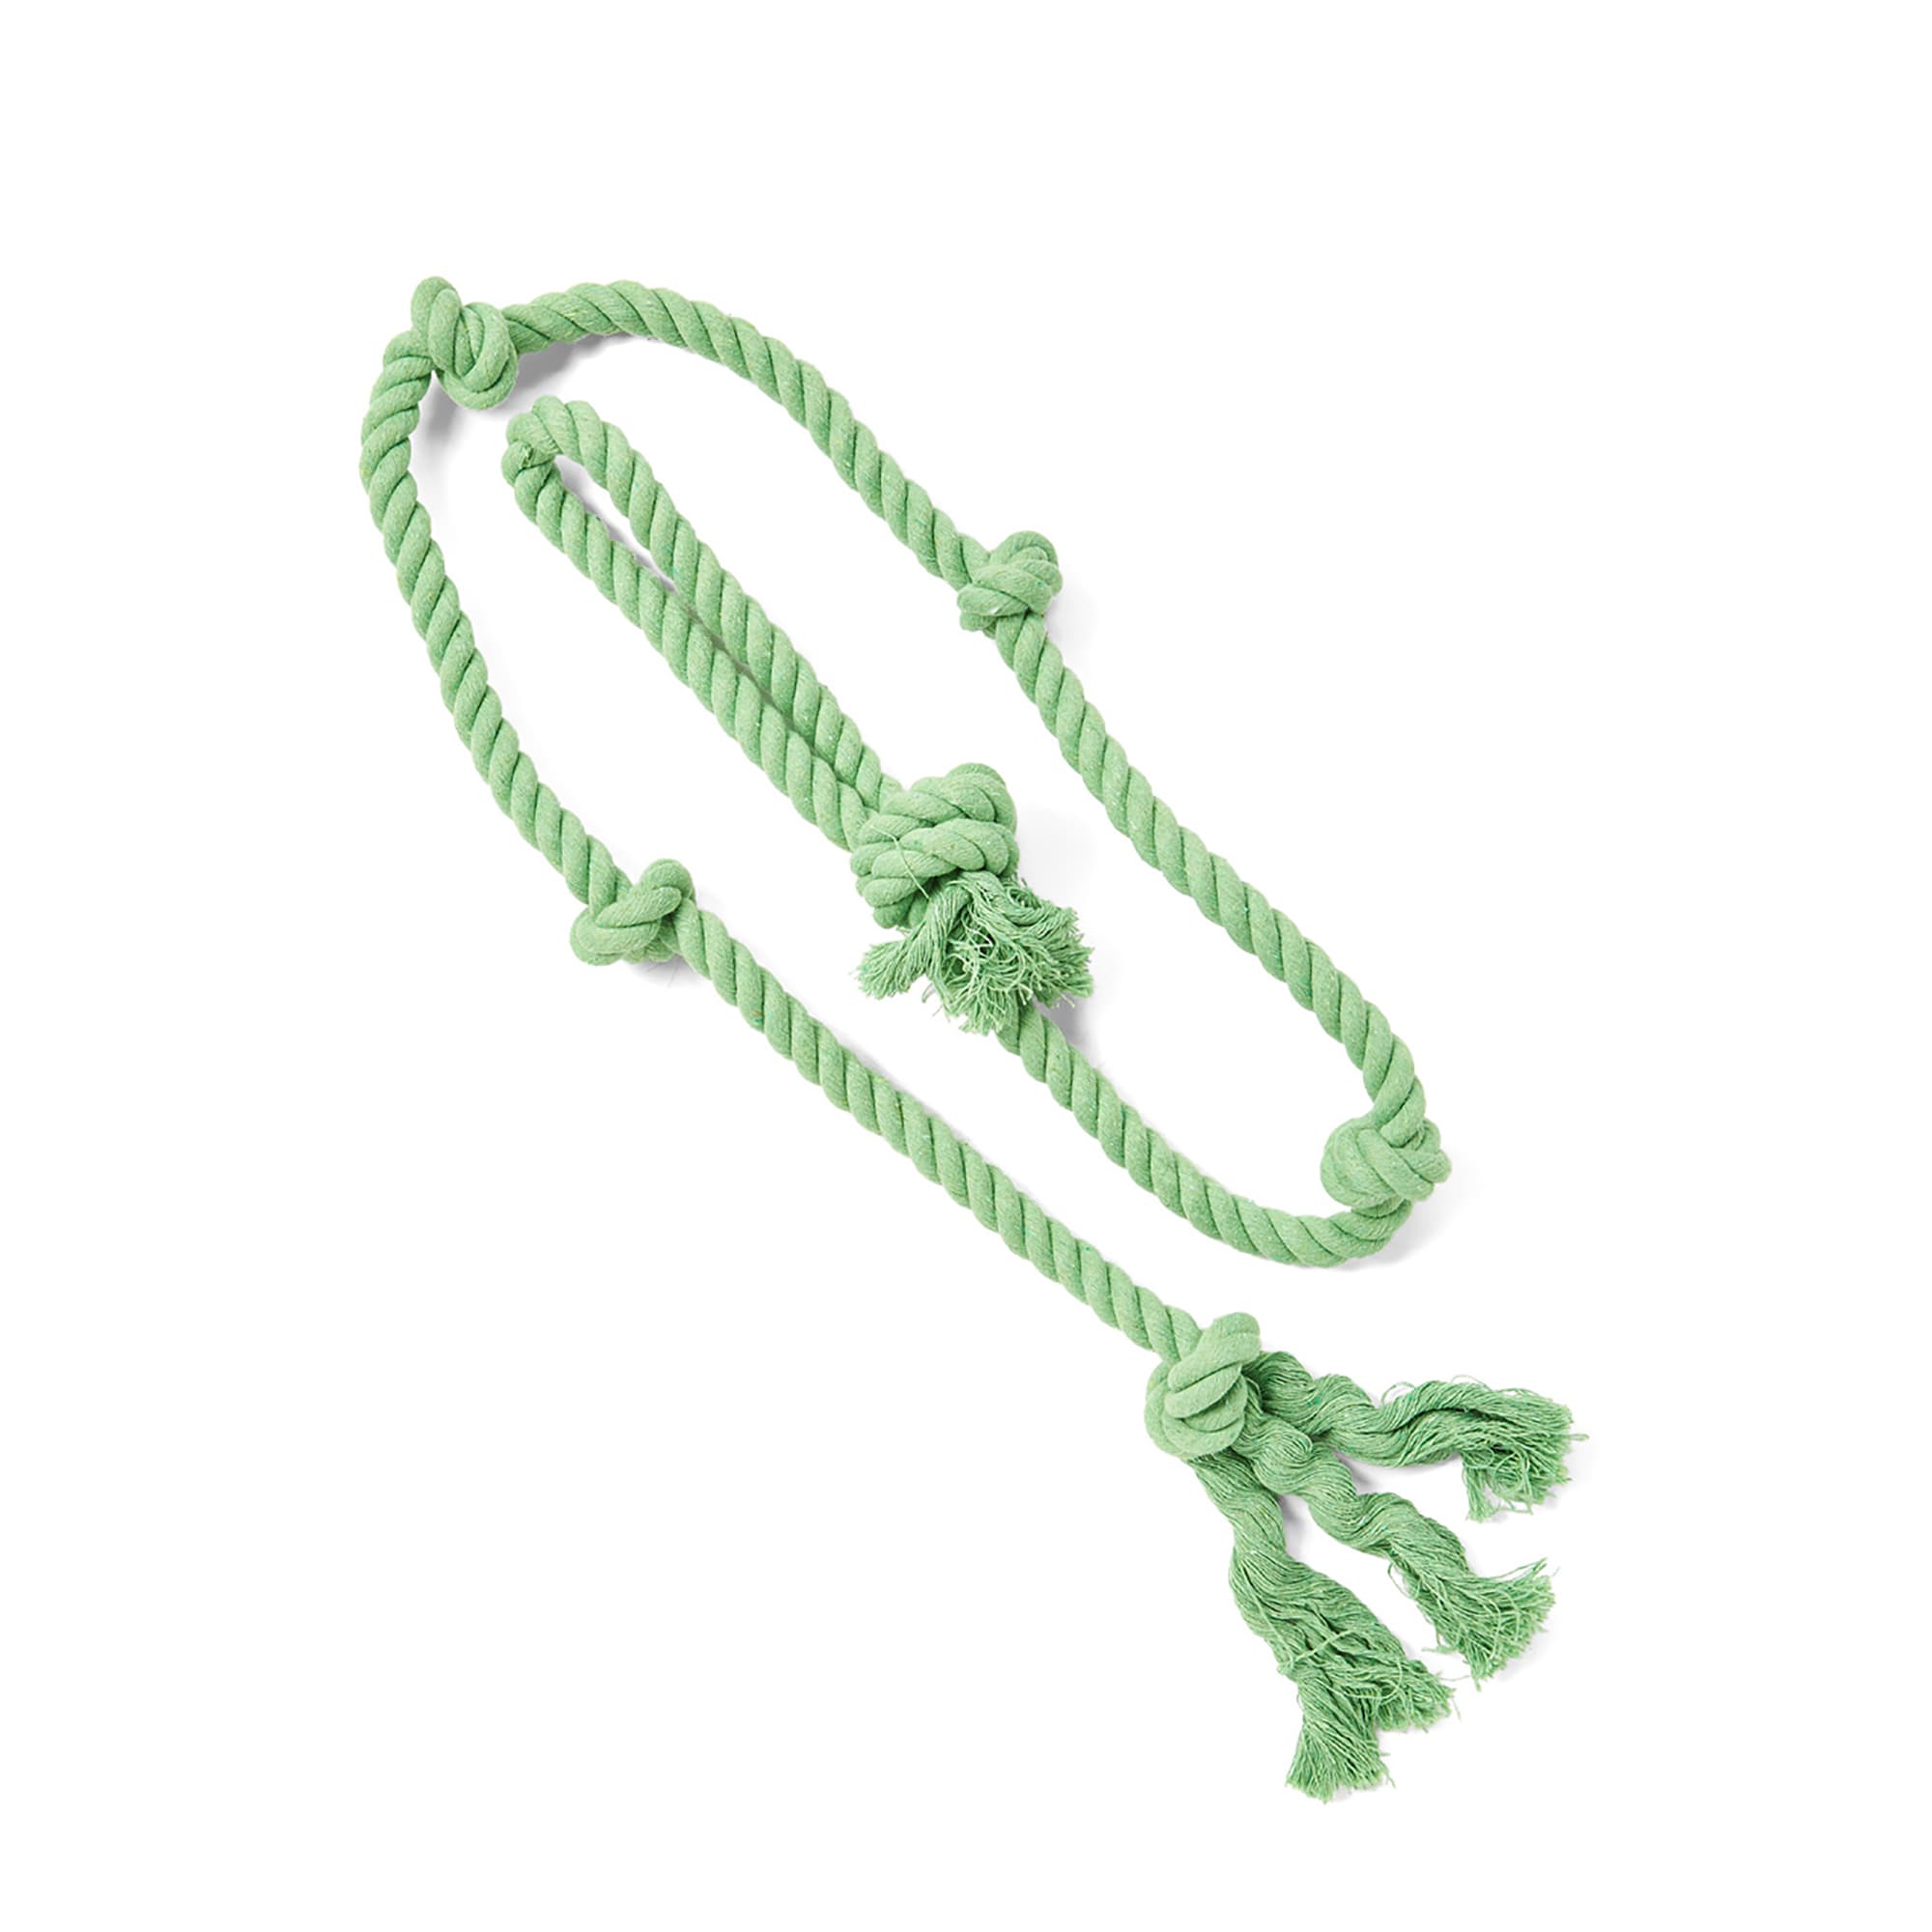 Green Knotted Rope Tug O War Dog Toy